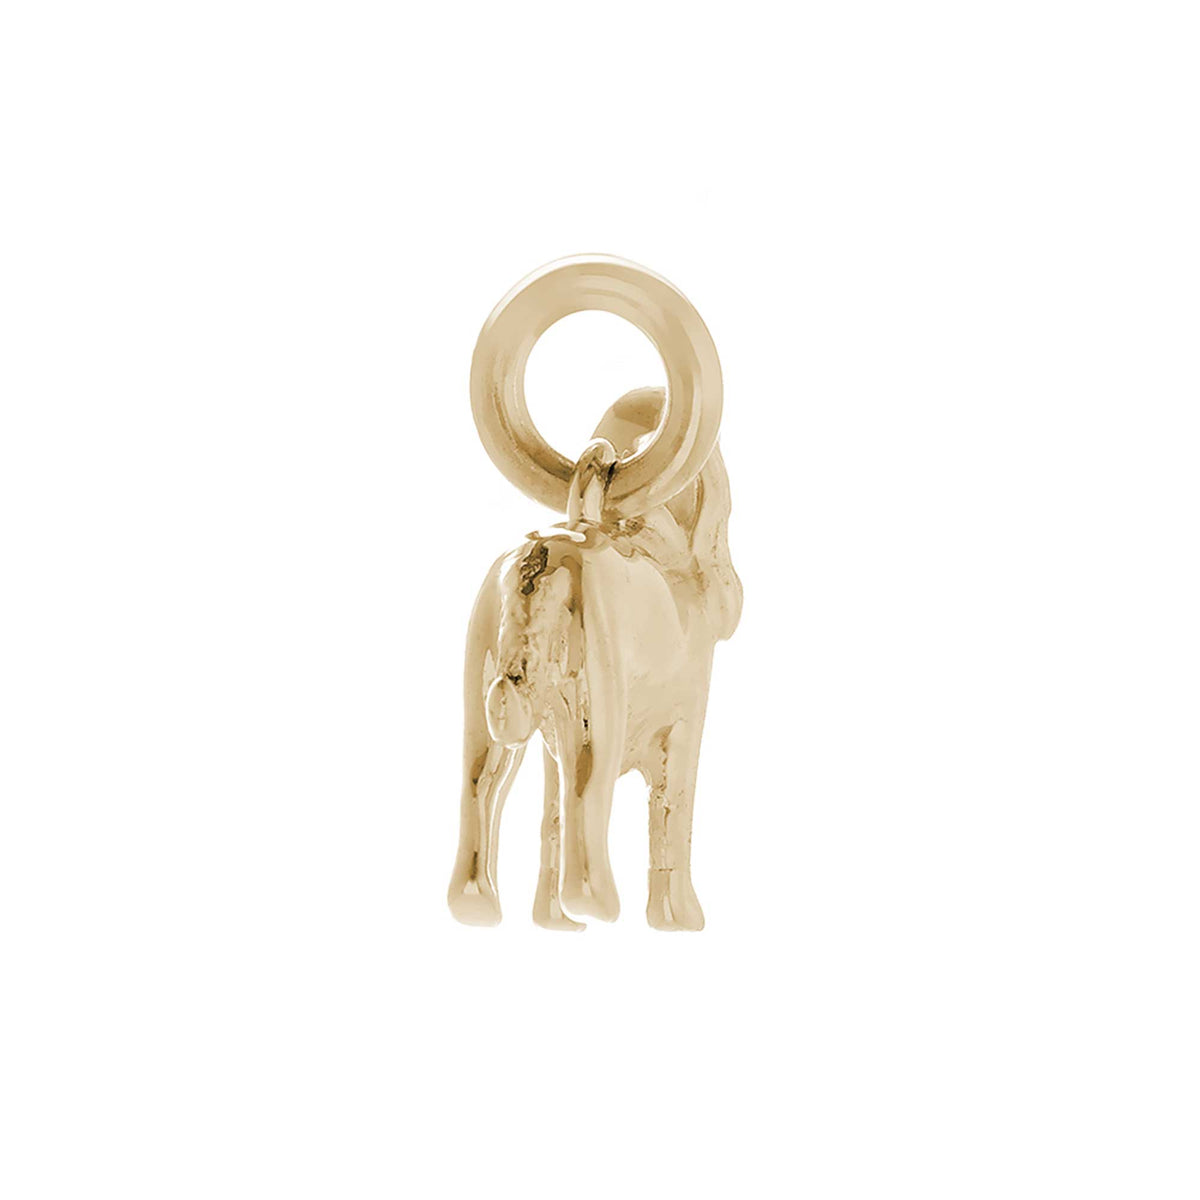 Solid 9ct gold Cocker Spaniel charm with tiny bandana, perfect for a dog lover&#39;s gift.